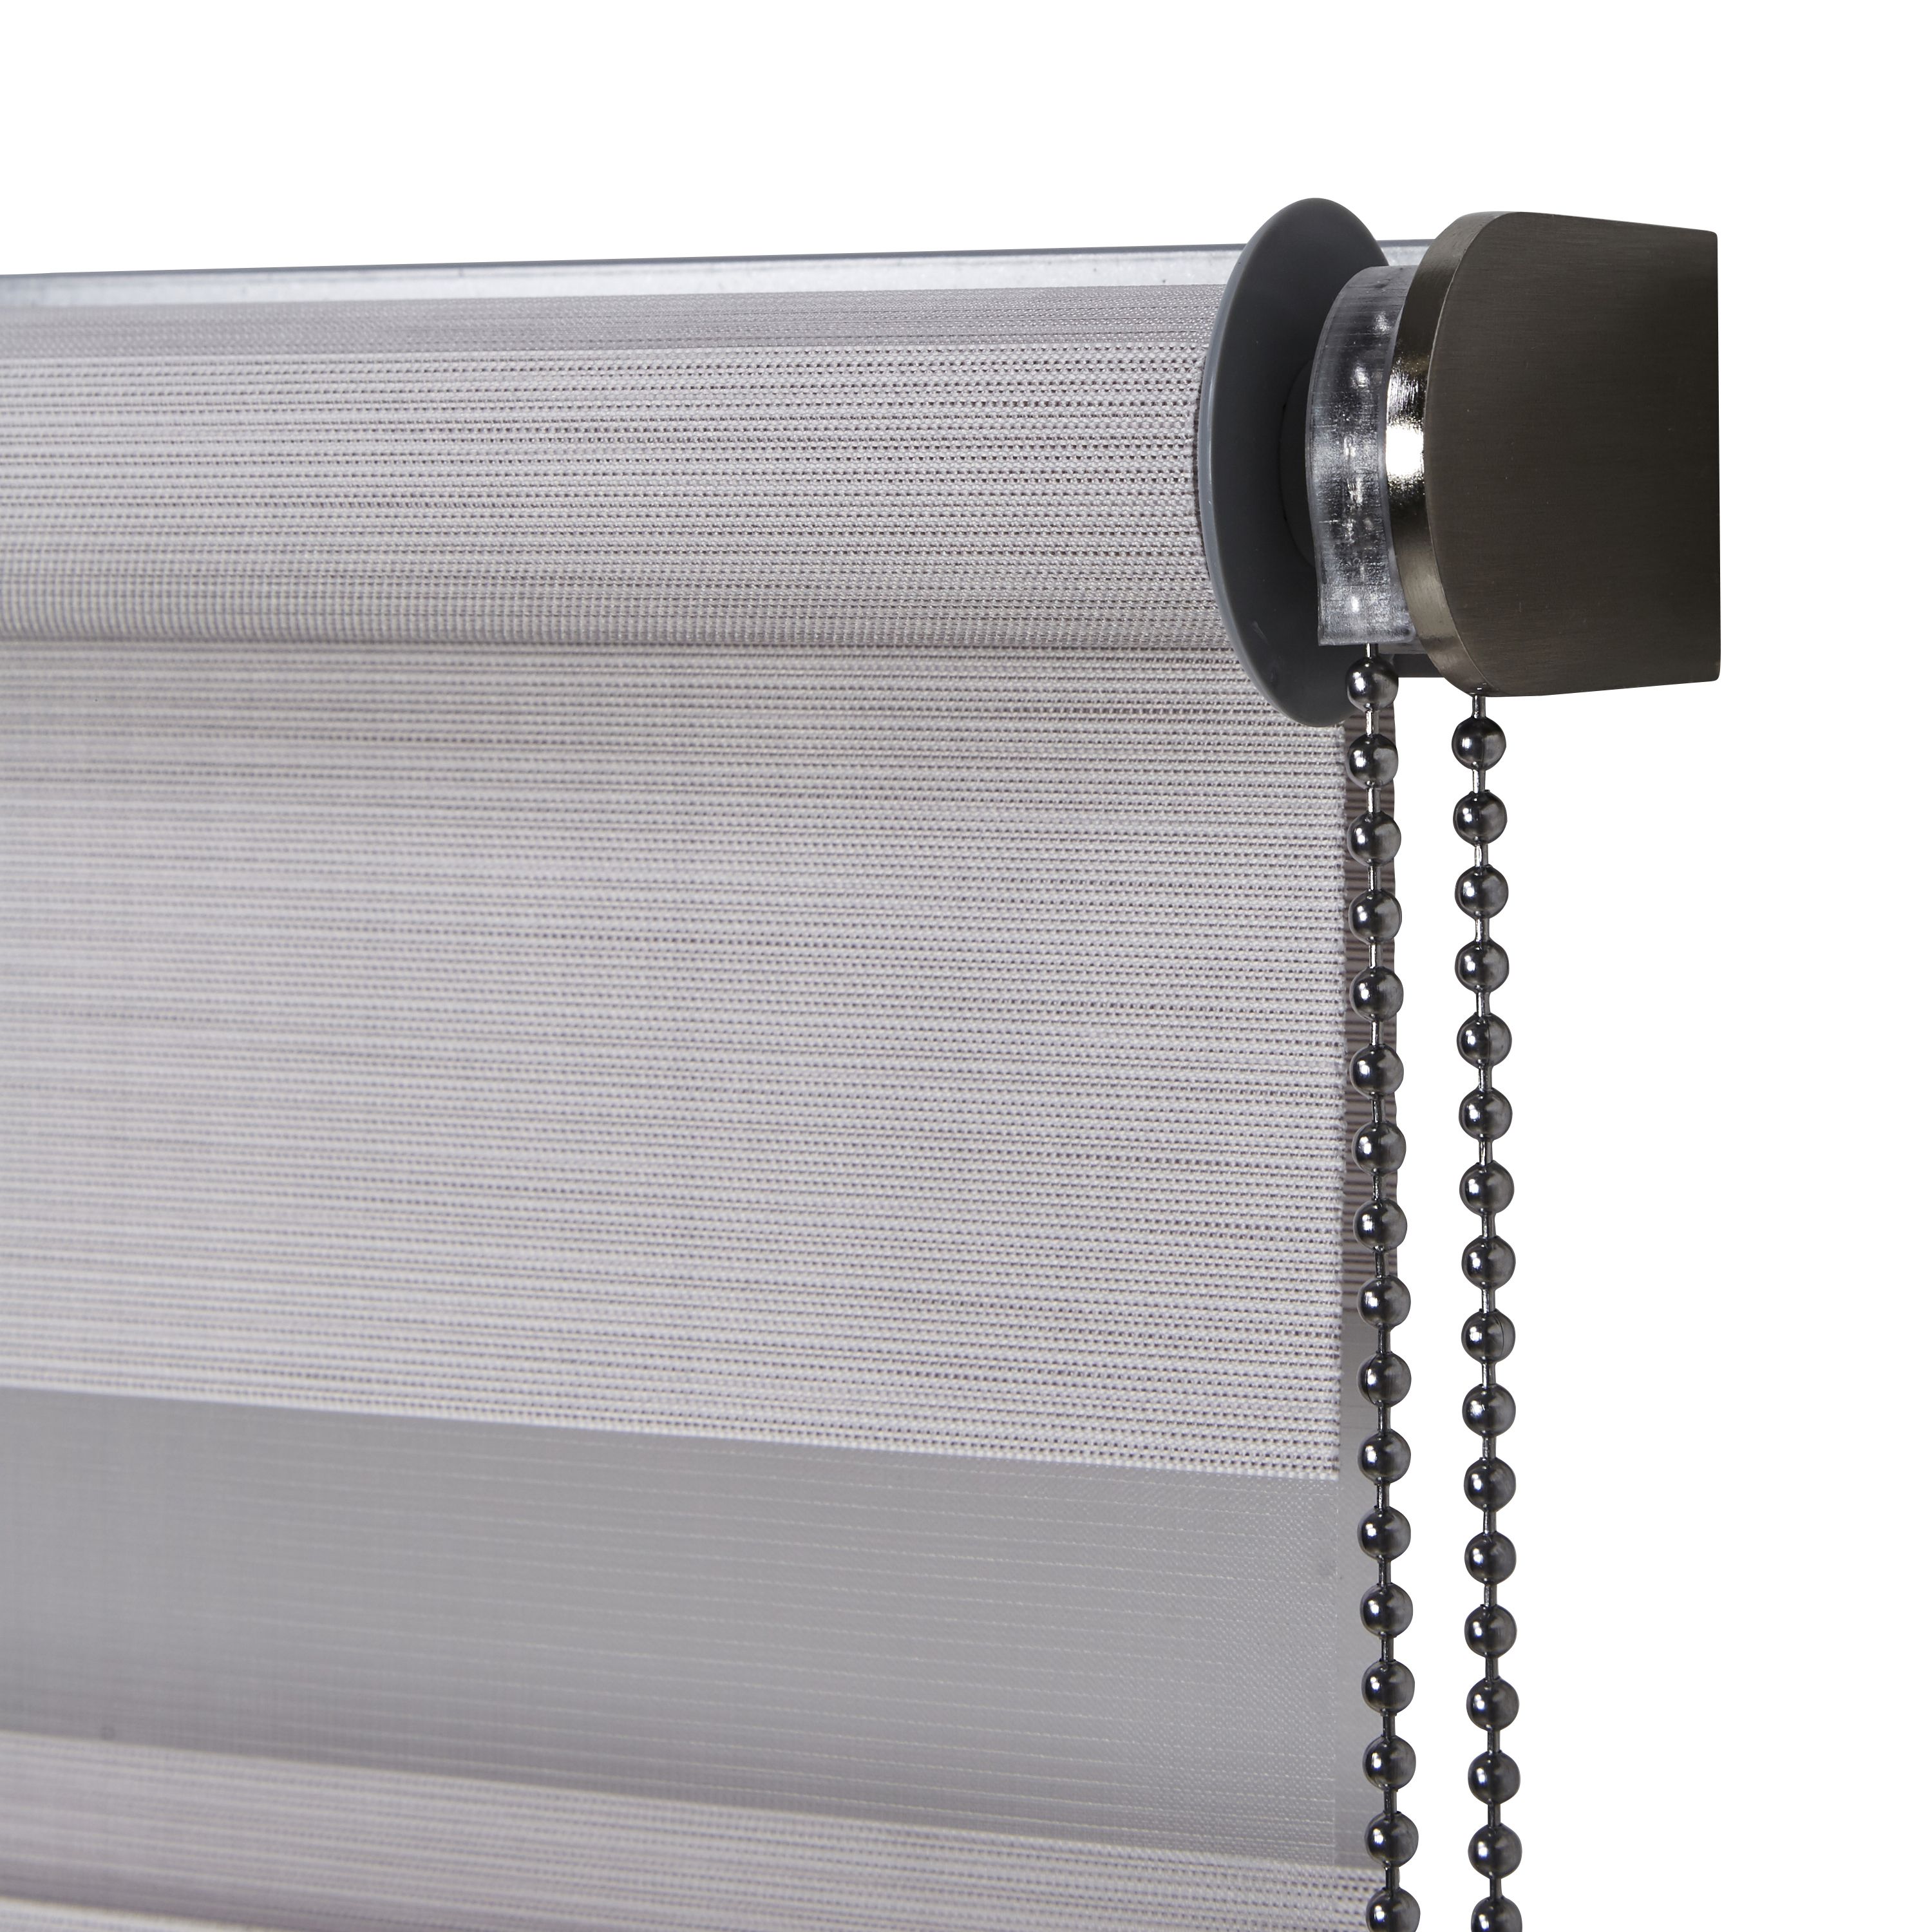 Kala Corded Natural Striped Day & night Roller Blind (W)120cm (L)240cm